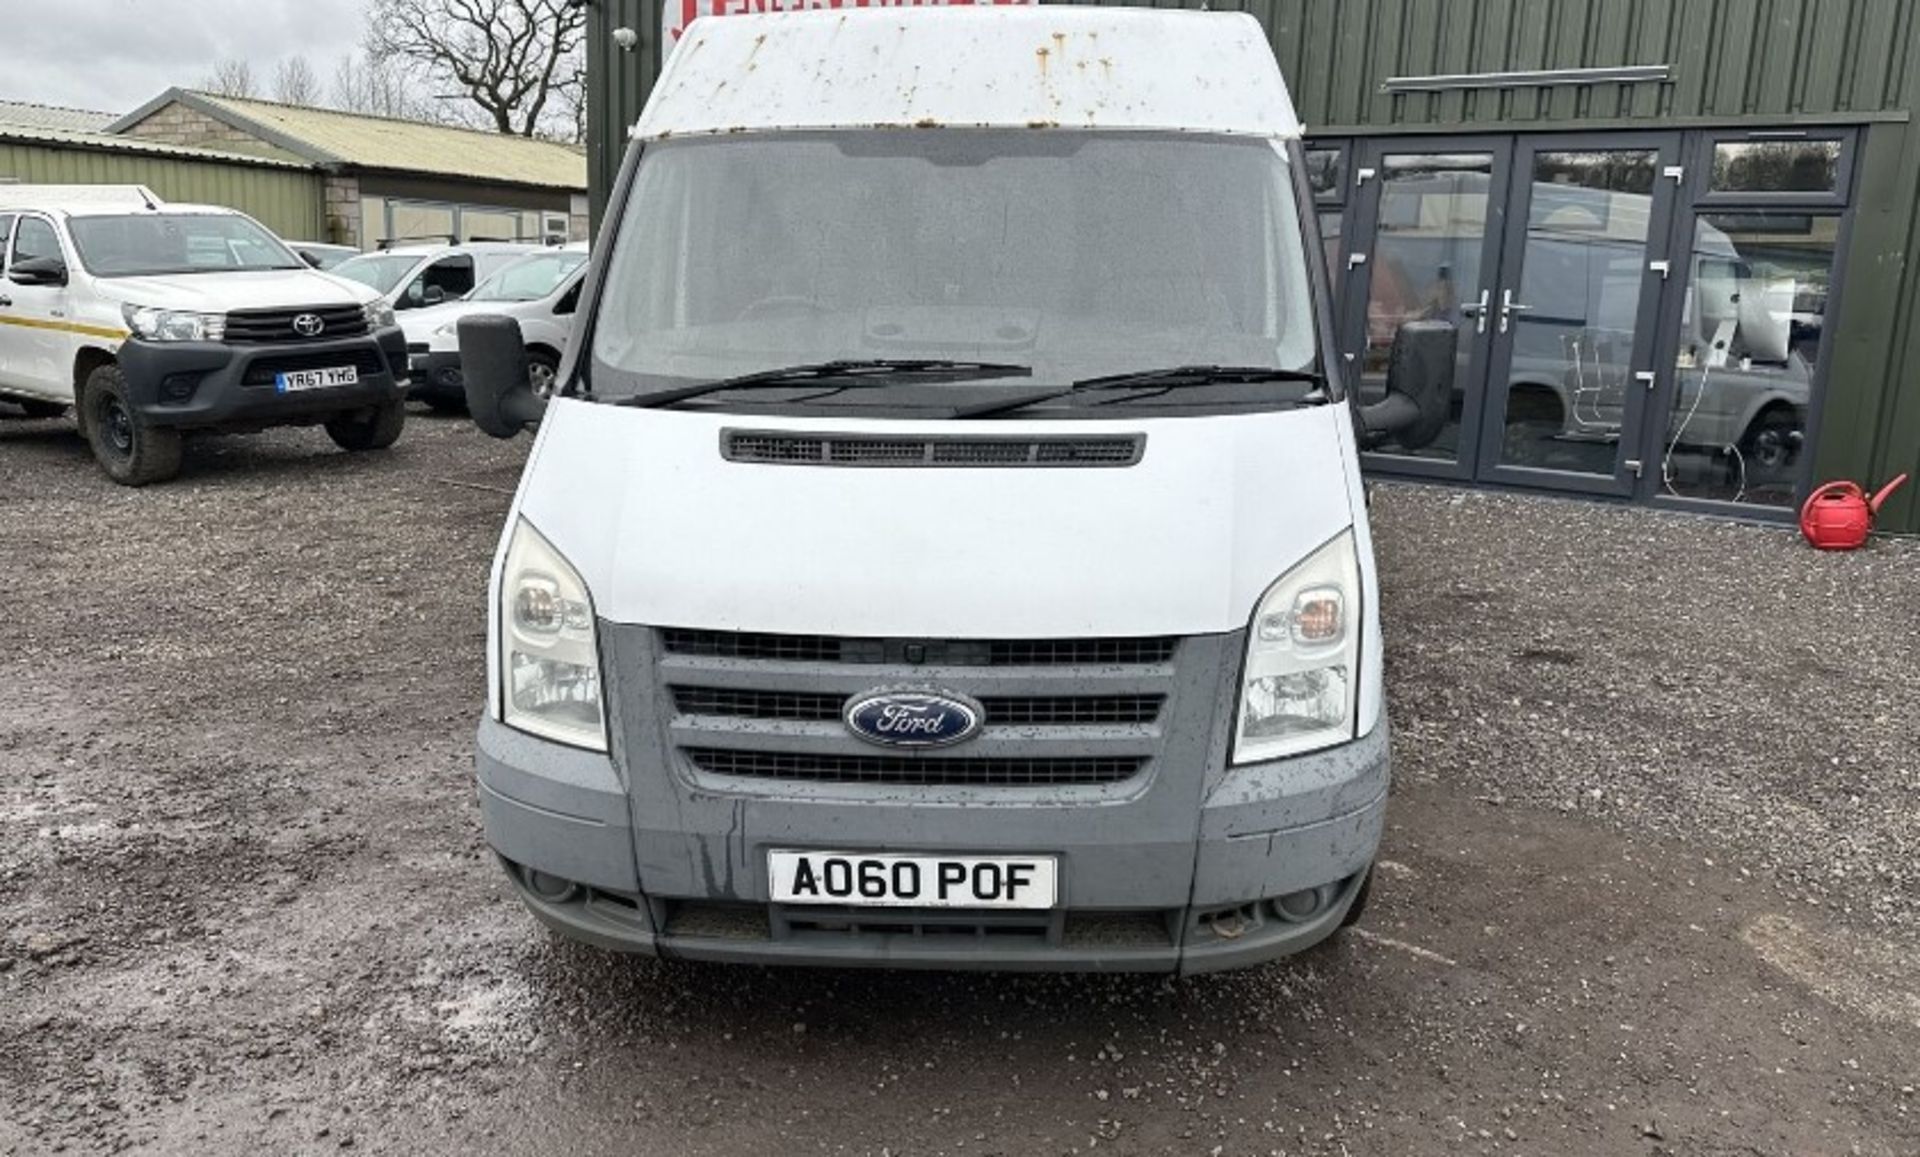 RELIABLE WORKHORSE: 60 PLATE FORD TRANSIT 260, MEDIUM ROOF, READY TO TACKLE TASKS - Image 2 of 9